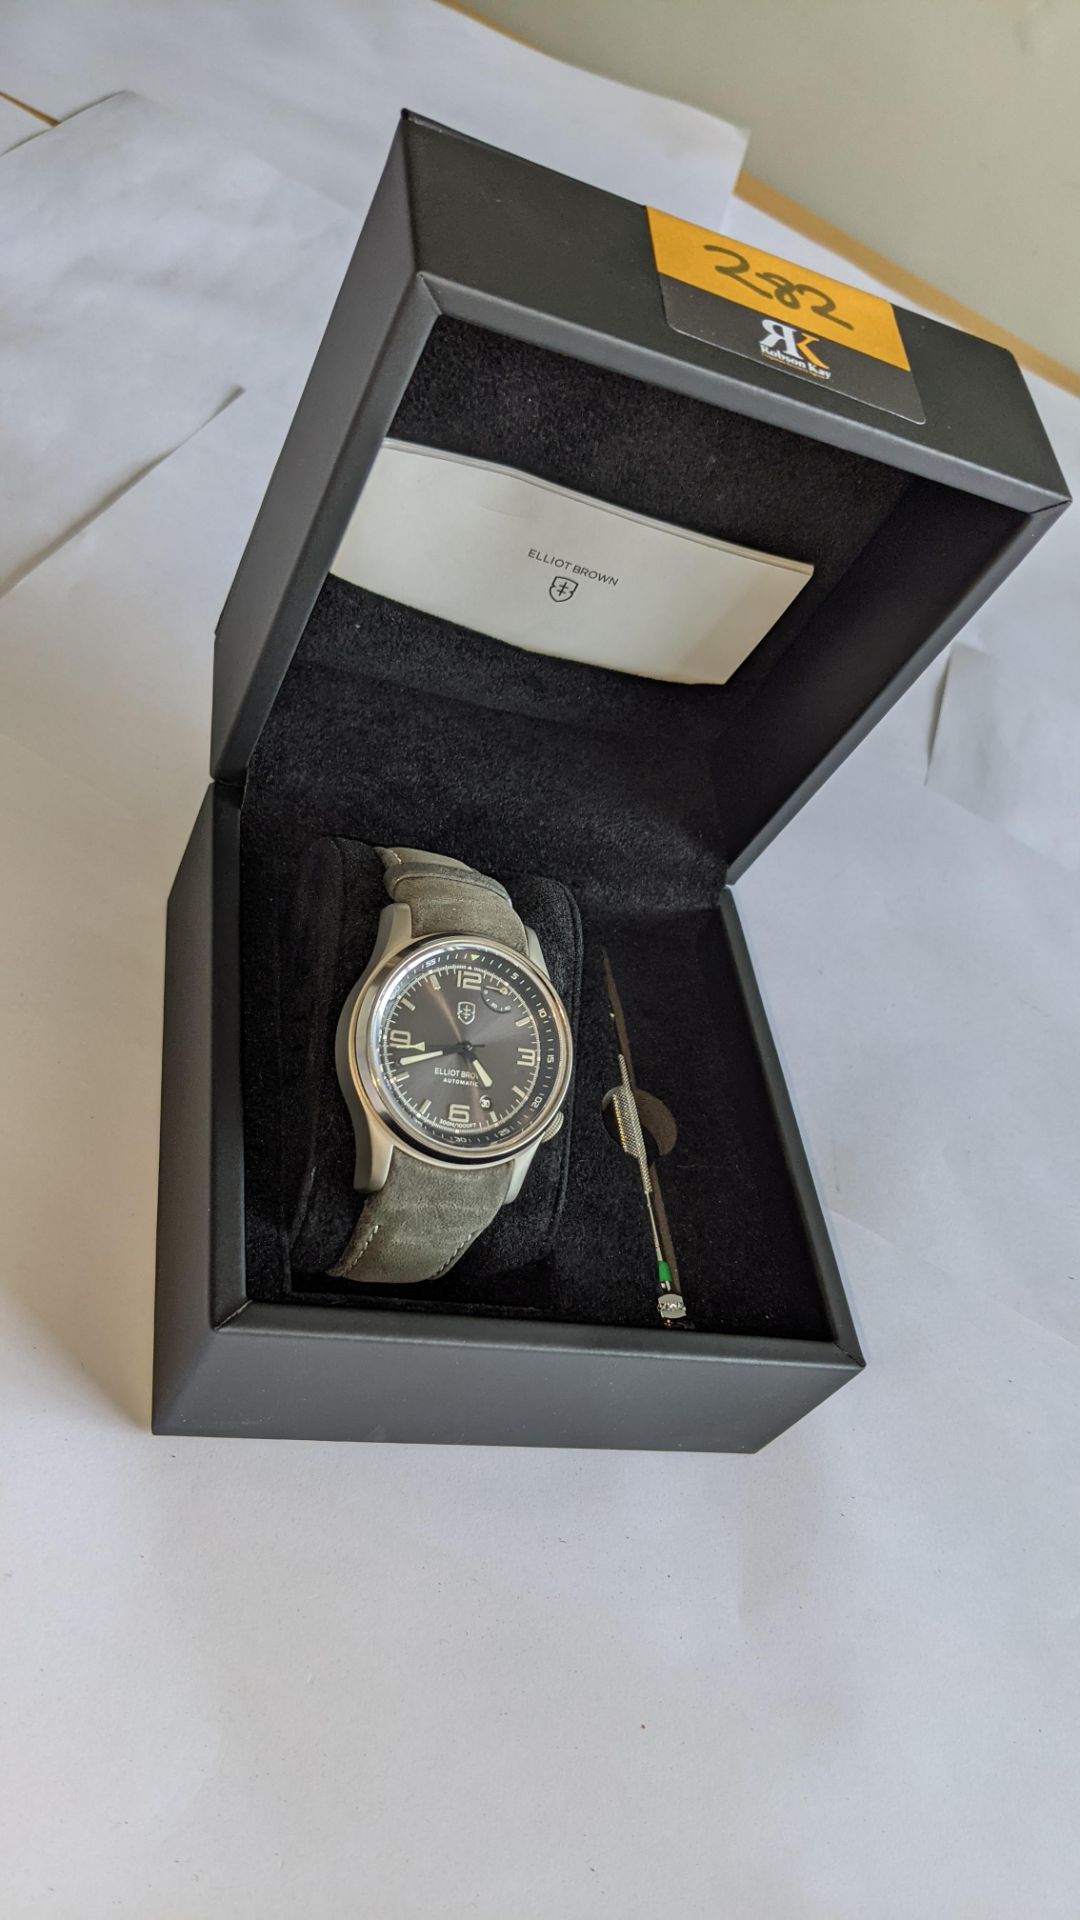 Elliott Brown Tyneham Limited Edition automatic watch, 5 of 500, product code 305-D05-L15. Stainles